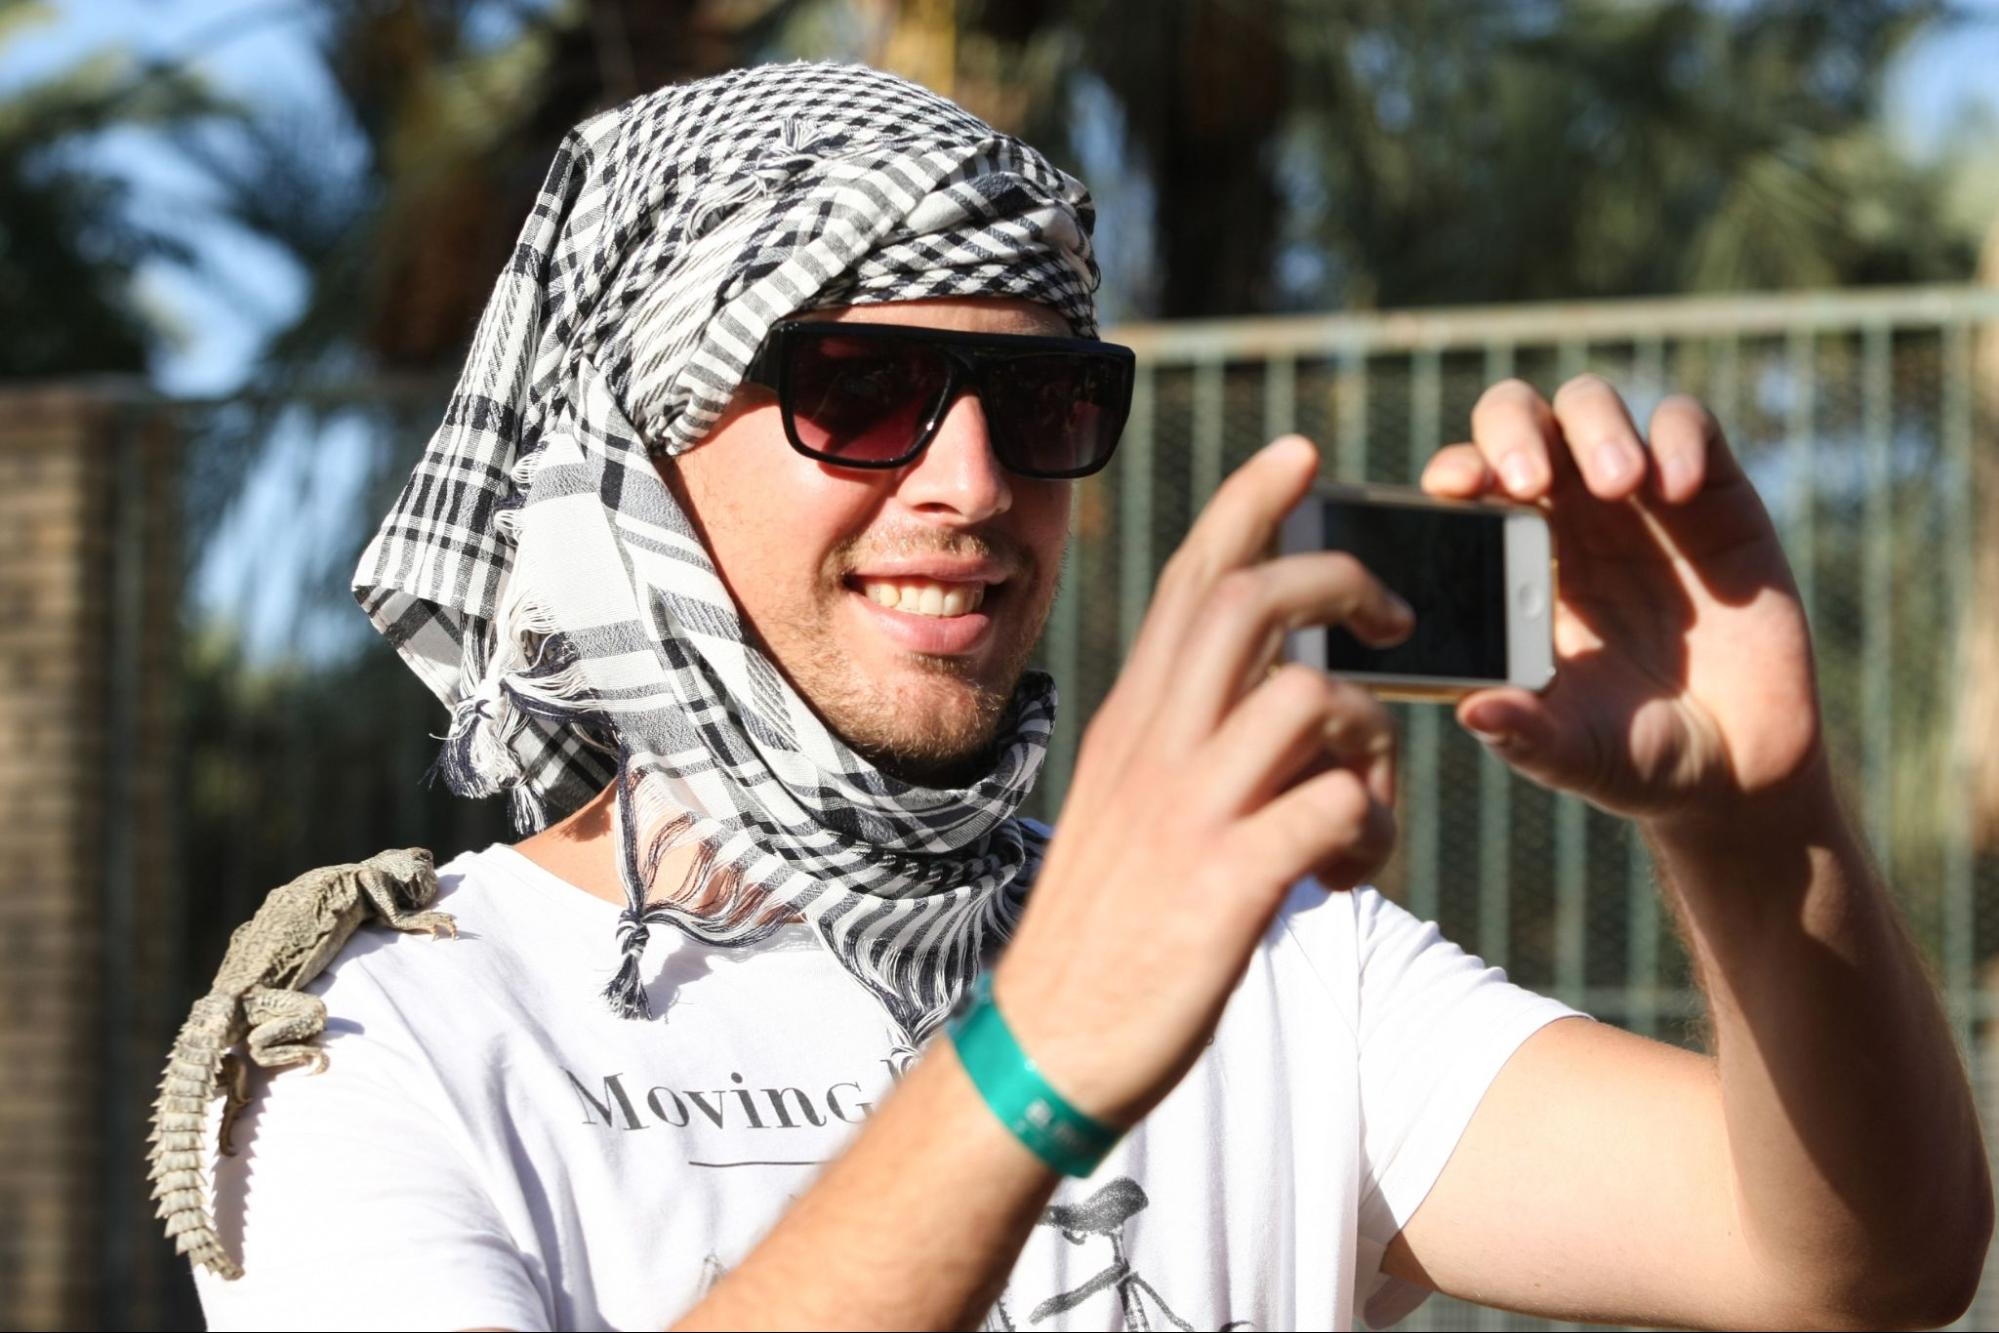 A tourist taking a selfie with the desert moniter on his shoulder in Zoo in Tozeur, Tunisia.